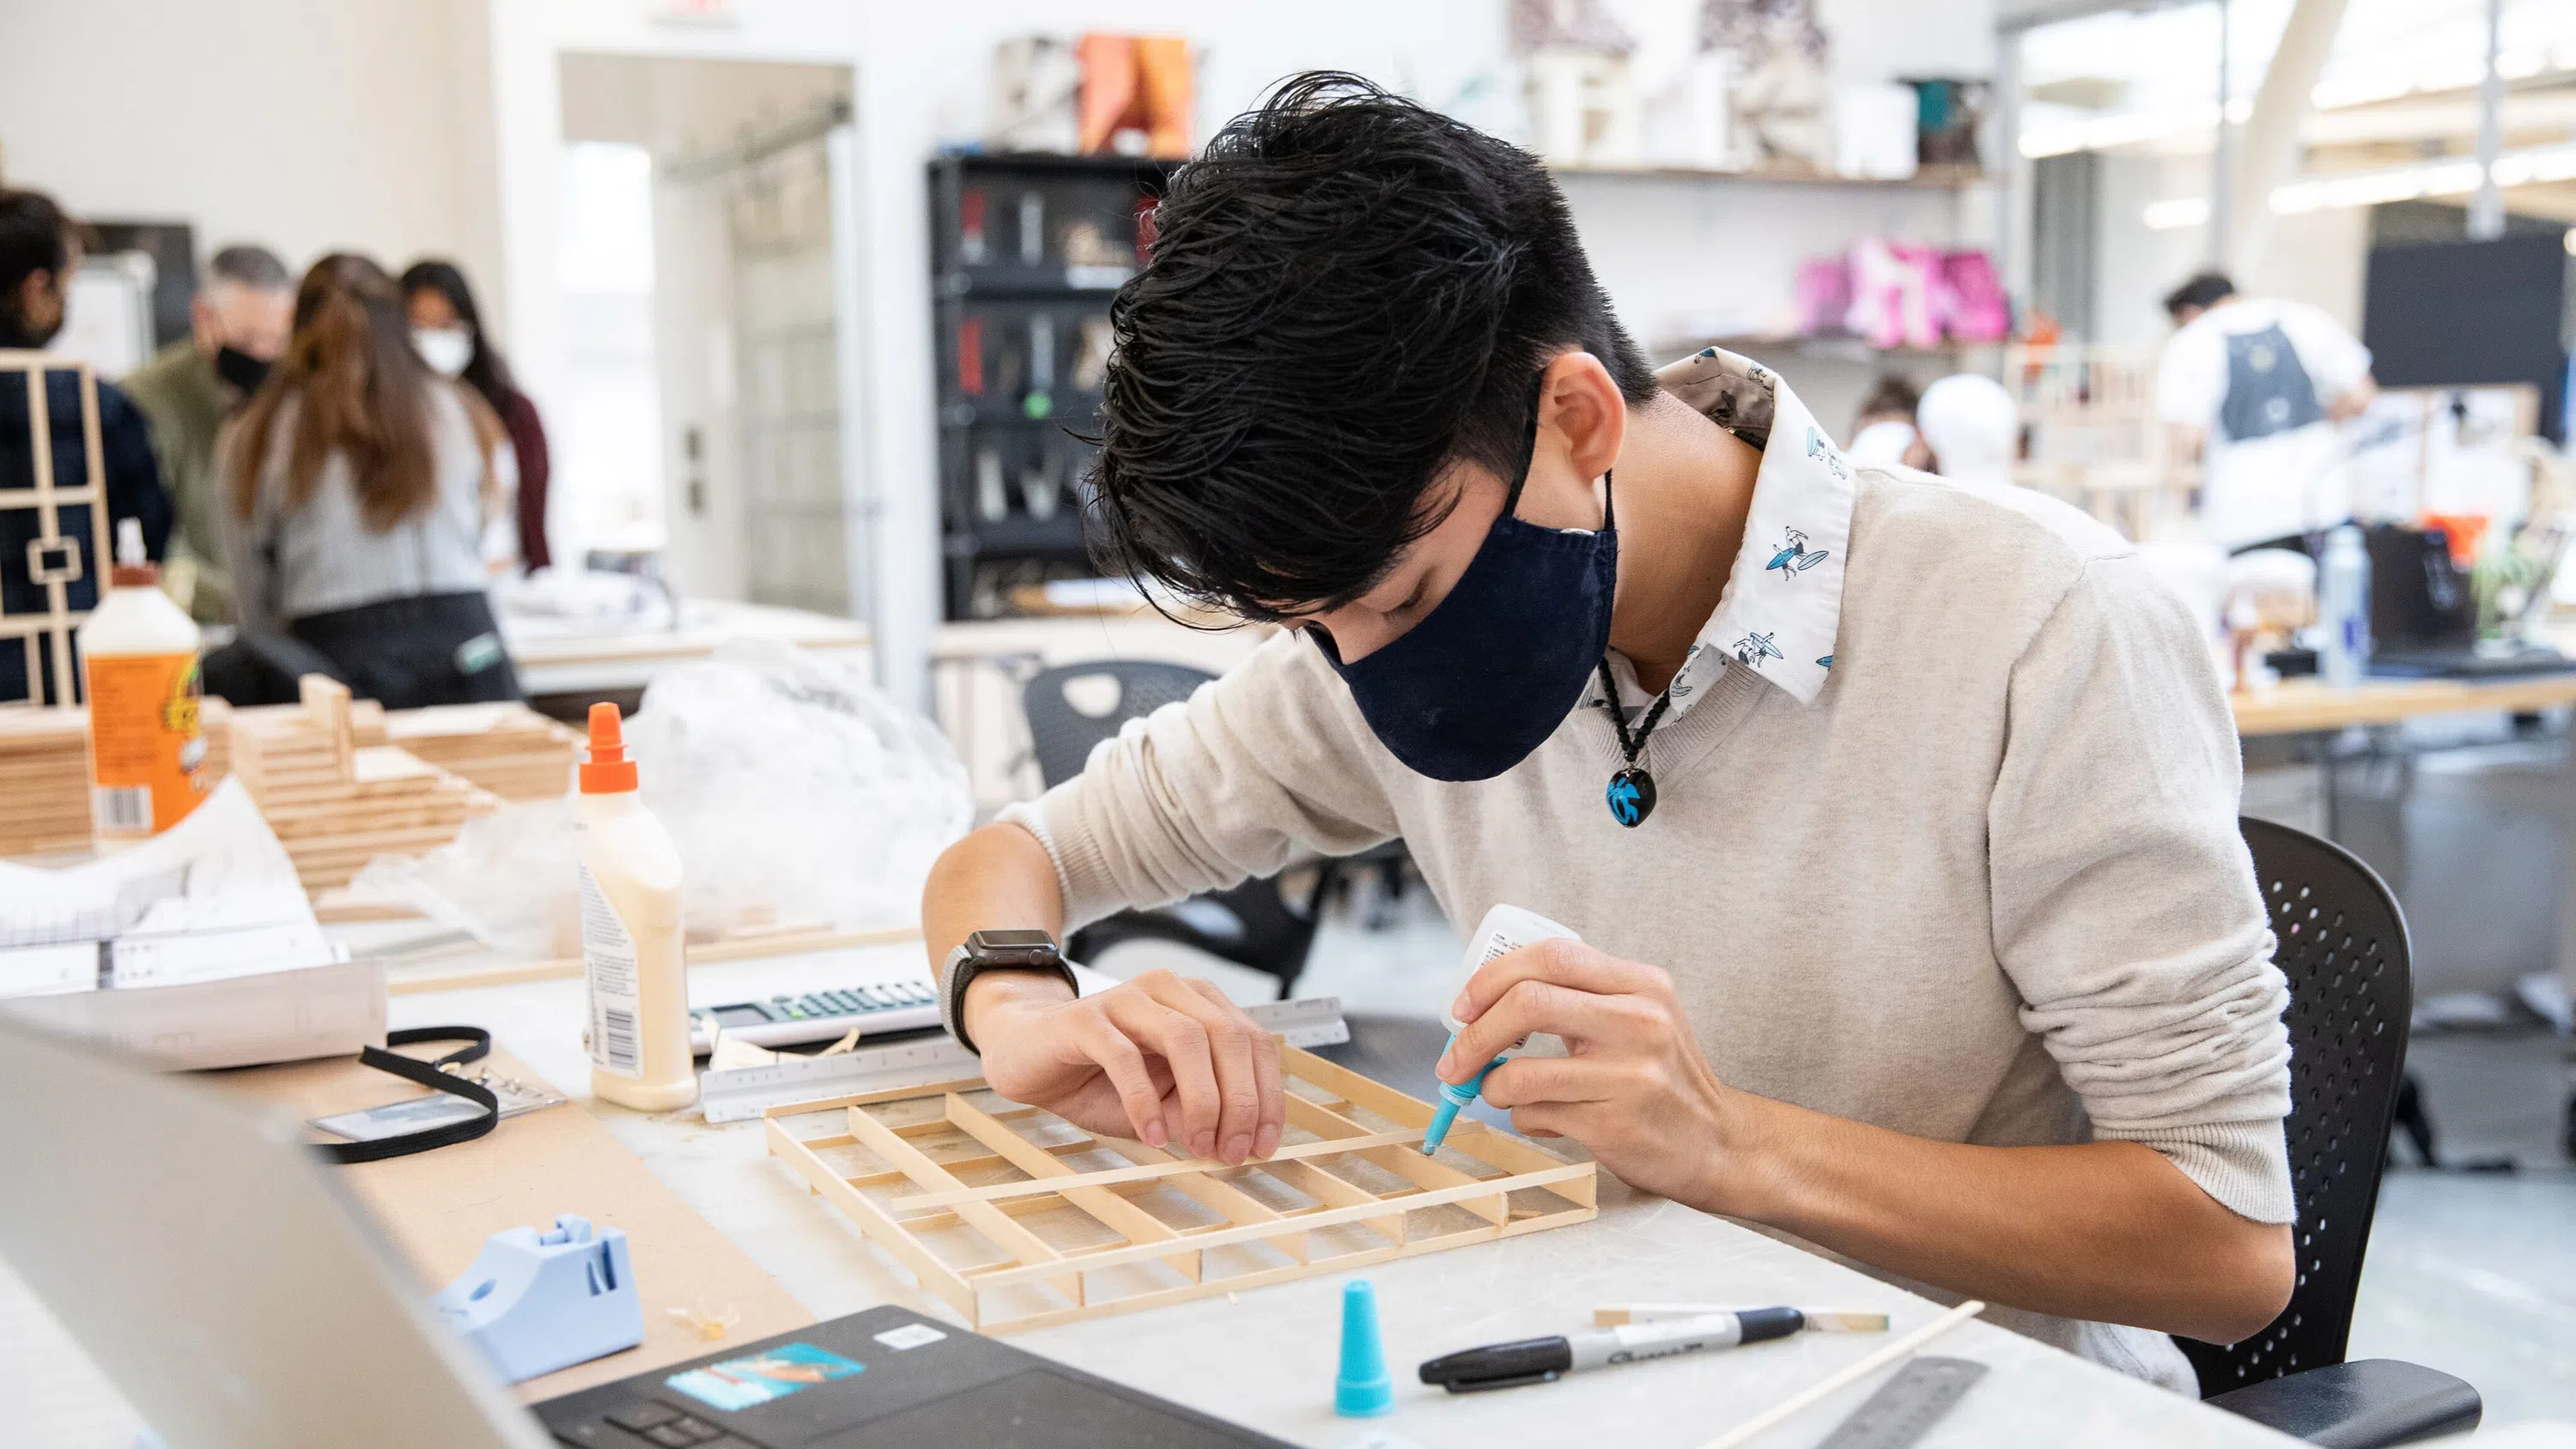 A close-up of a student working on a model in the Architecture studio.